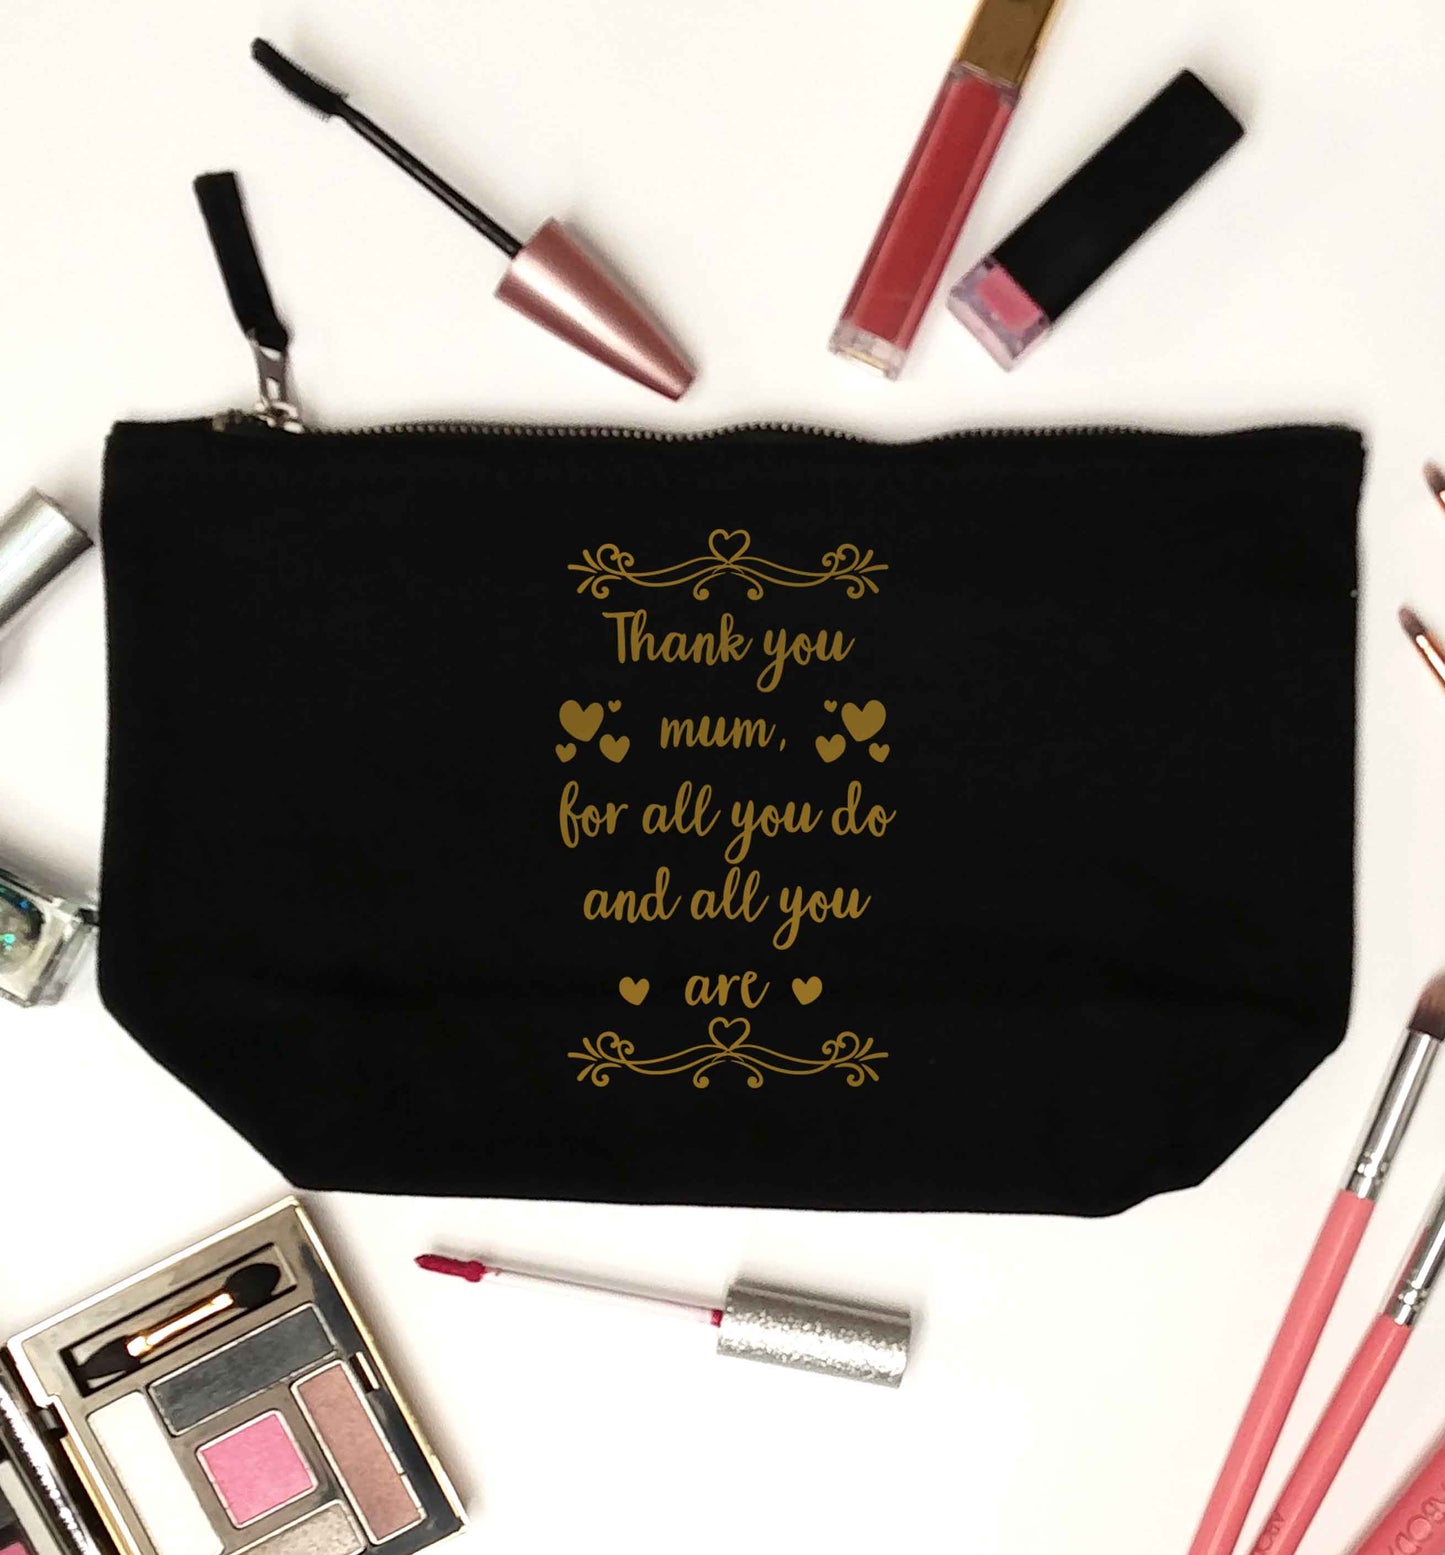 Gorgeous gifts for mums on mother's day! Thank you mum for all you do and all you are black makeup bag